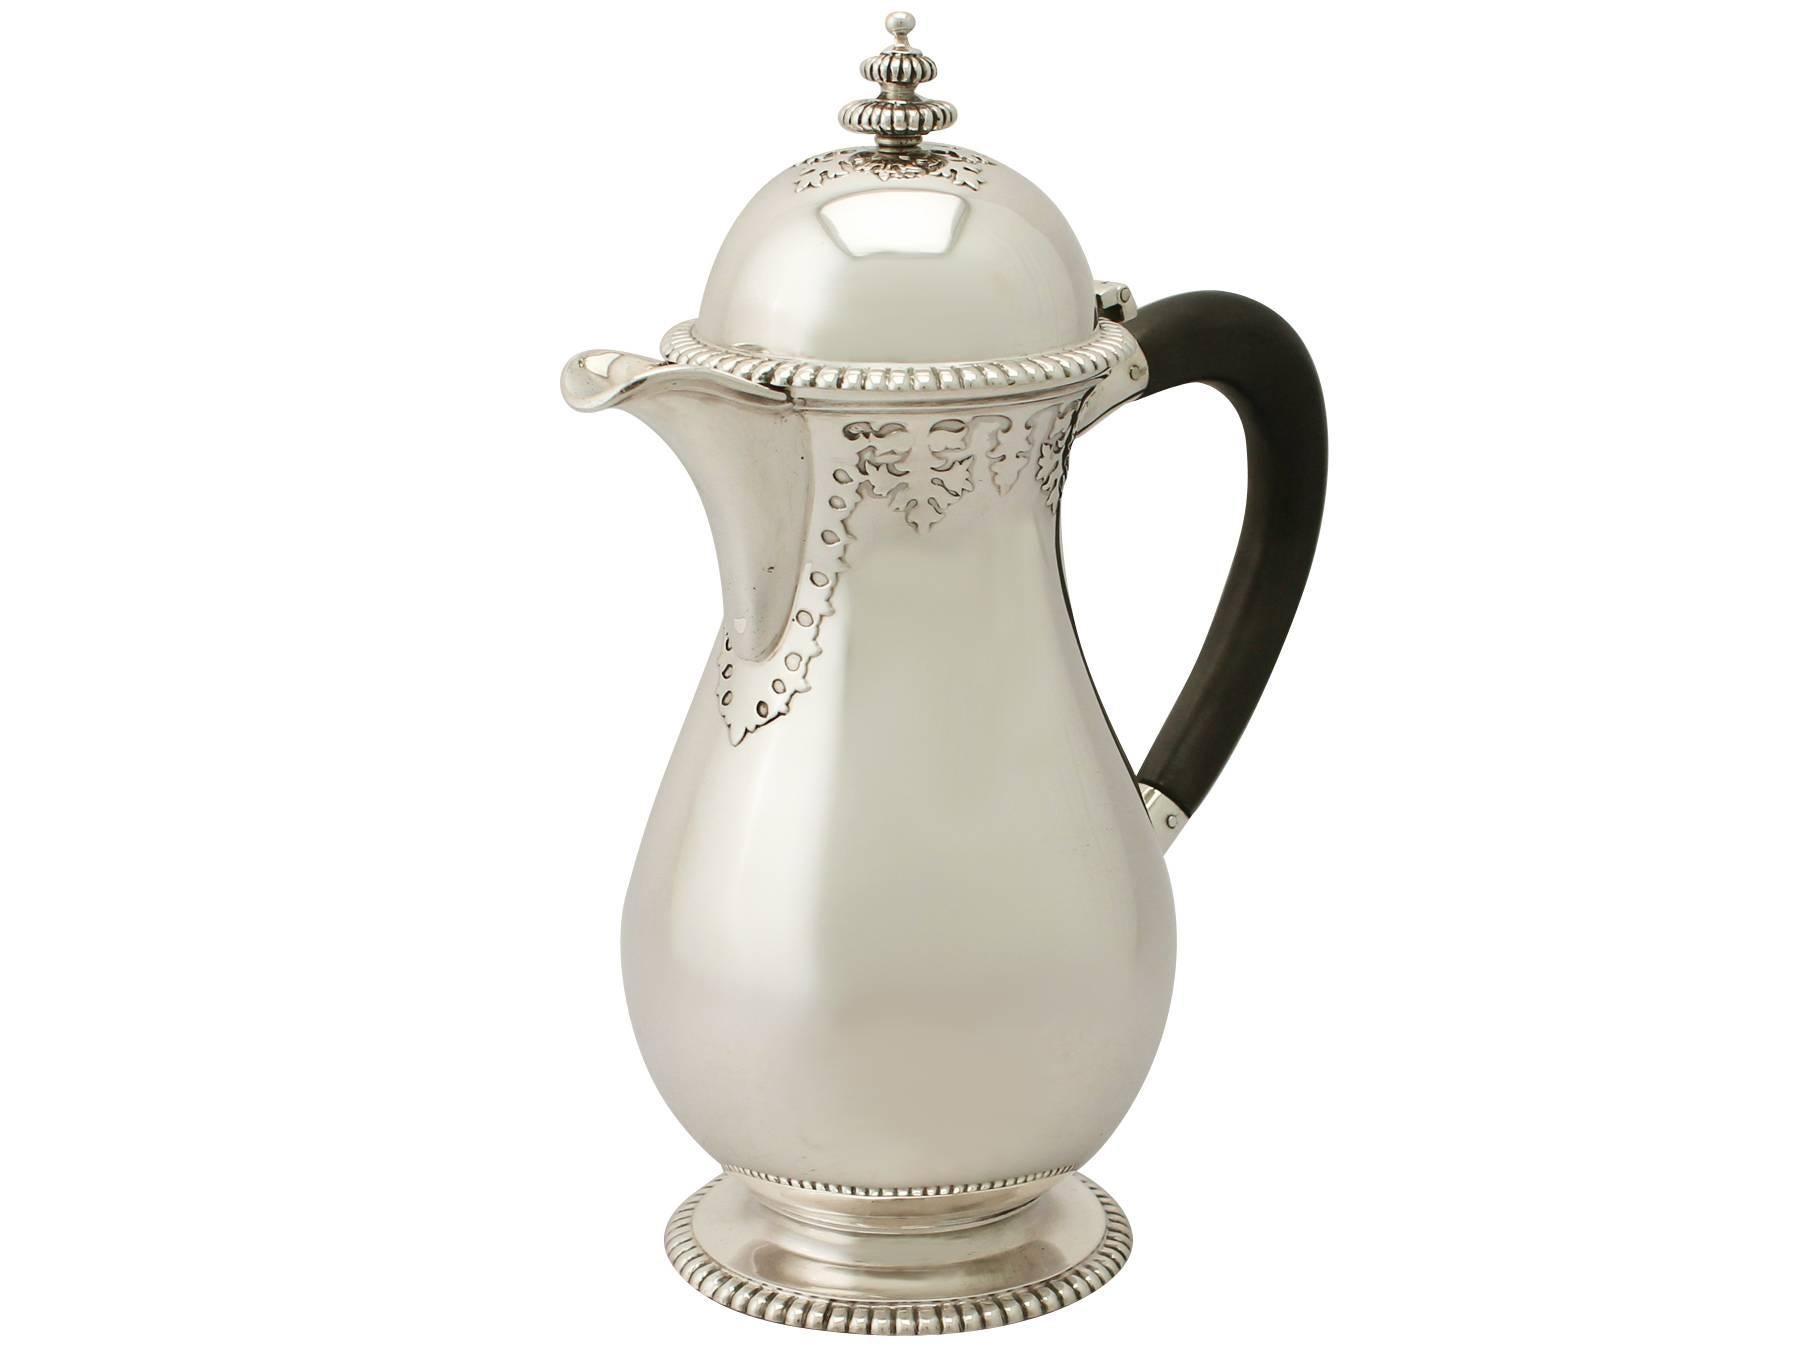 An exceptional, fine and impressive antique George V English sterling silver coffee pot/jug; an addition to the silver teaware collection.

This exceptional antique George V English sterling silver coffee pot/jug has a baluster shaped form.

The